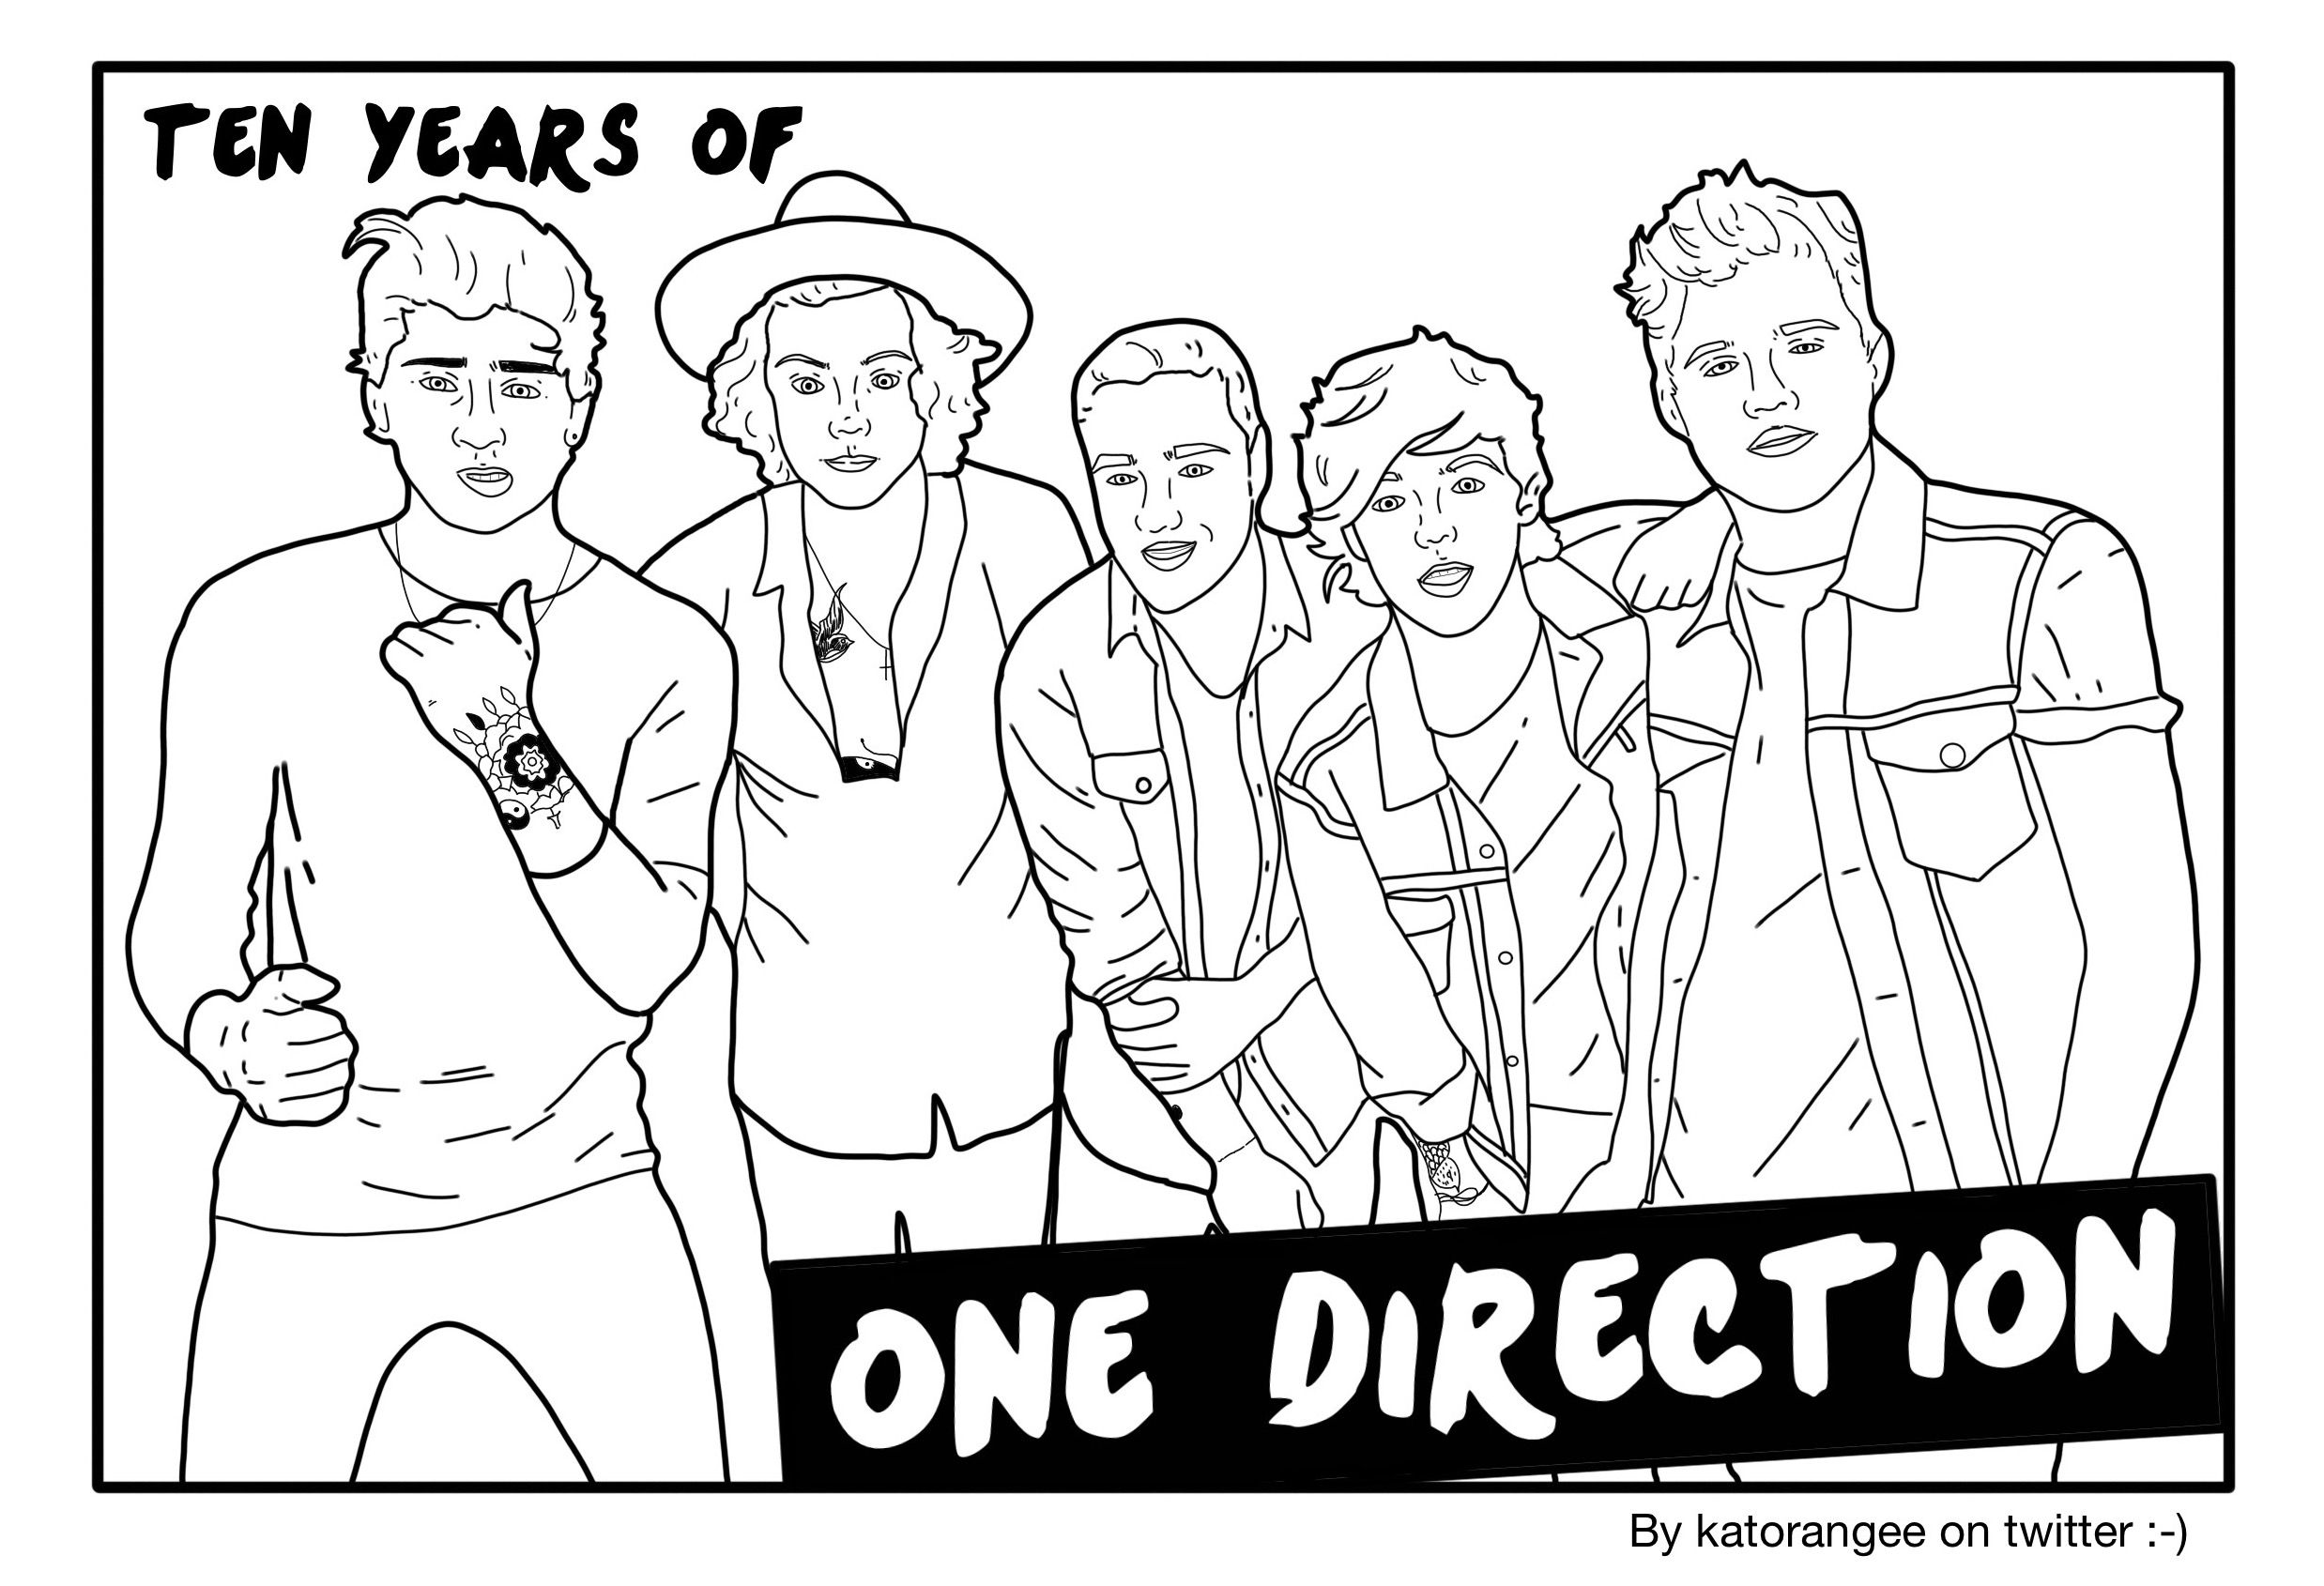 One direction coloring page one direction drawings coloring pages one direction